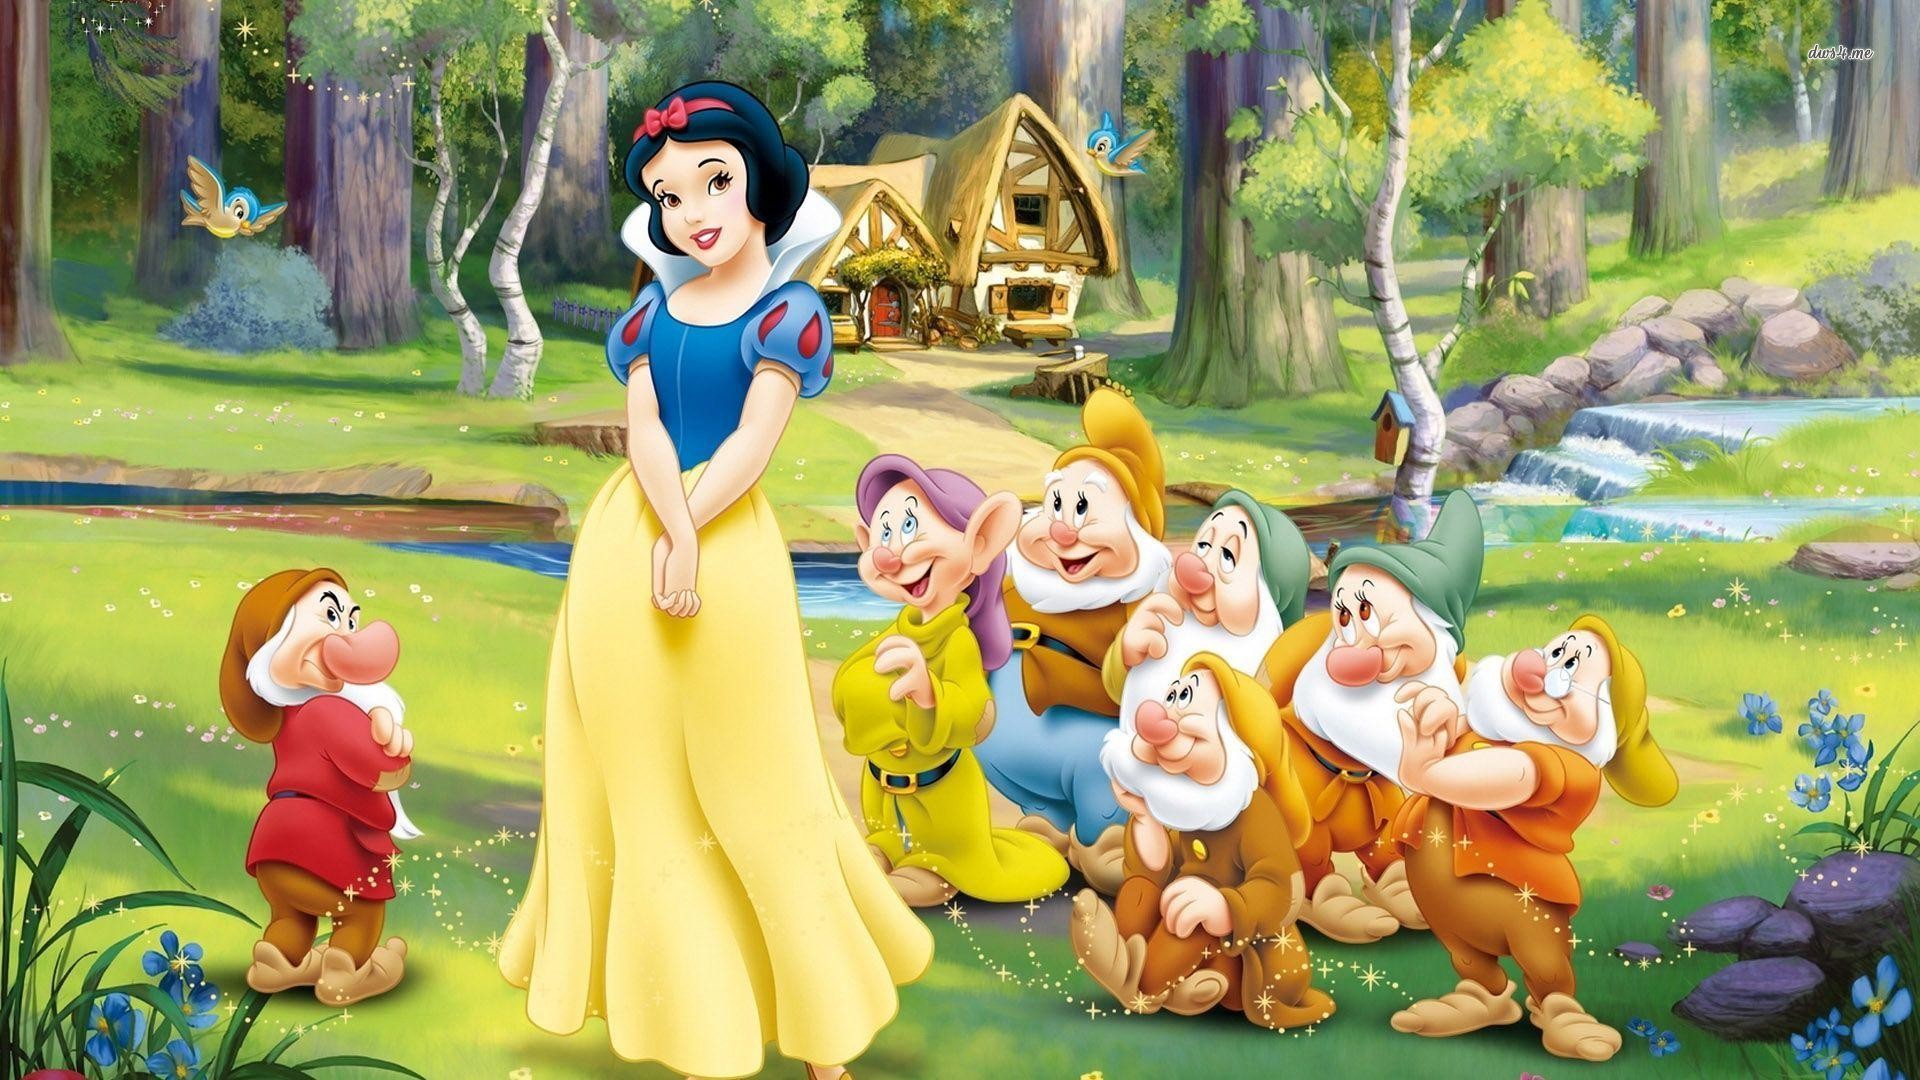 1920x1080 Snow White And The Seven Dwarfs wallpaper - Cartoon wallpapers - #